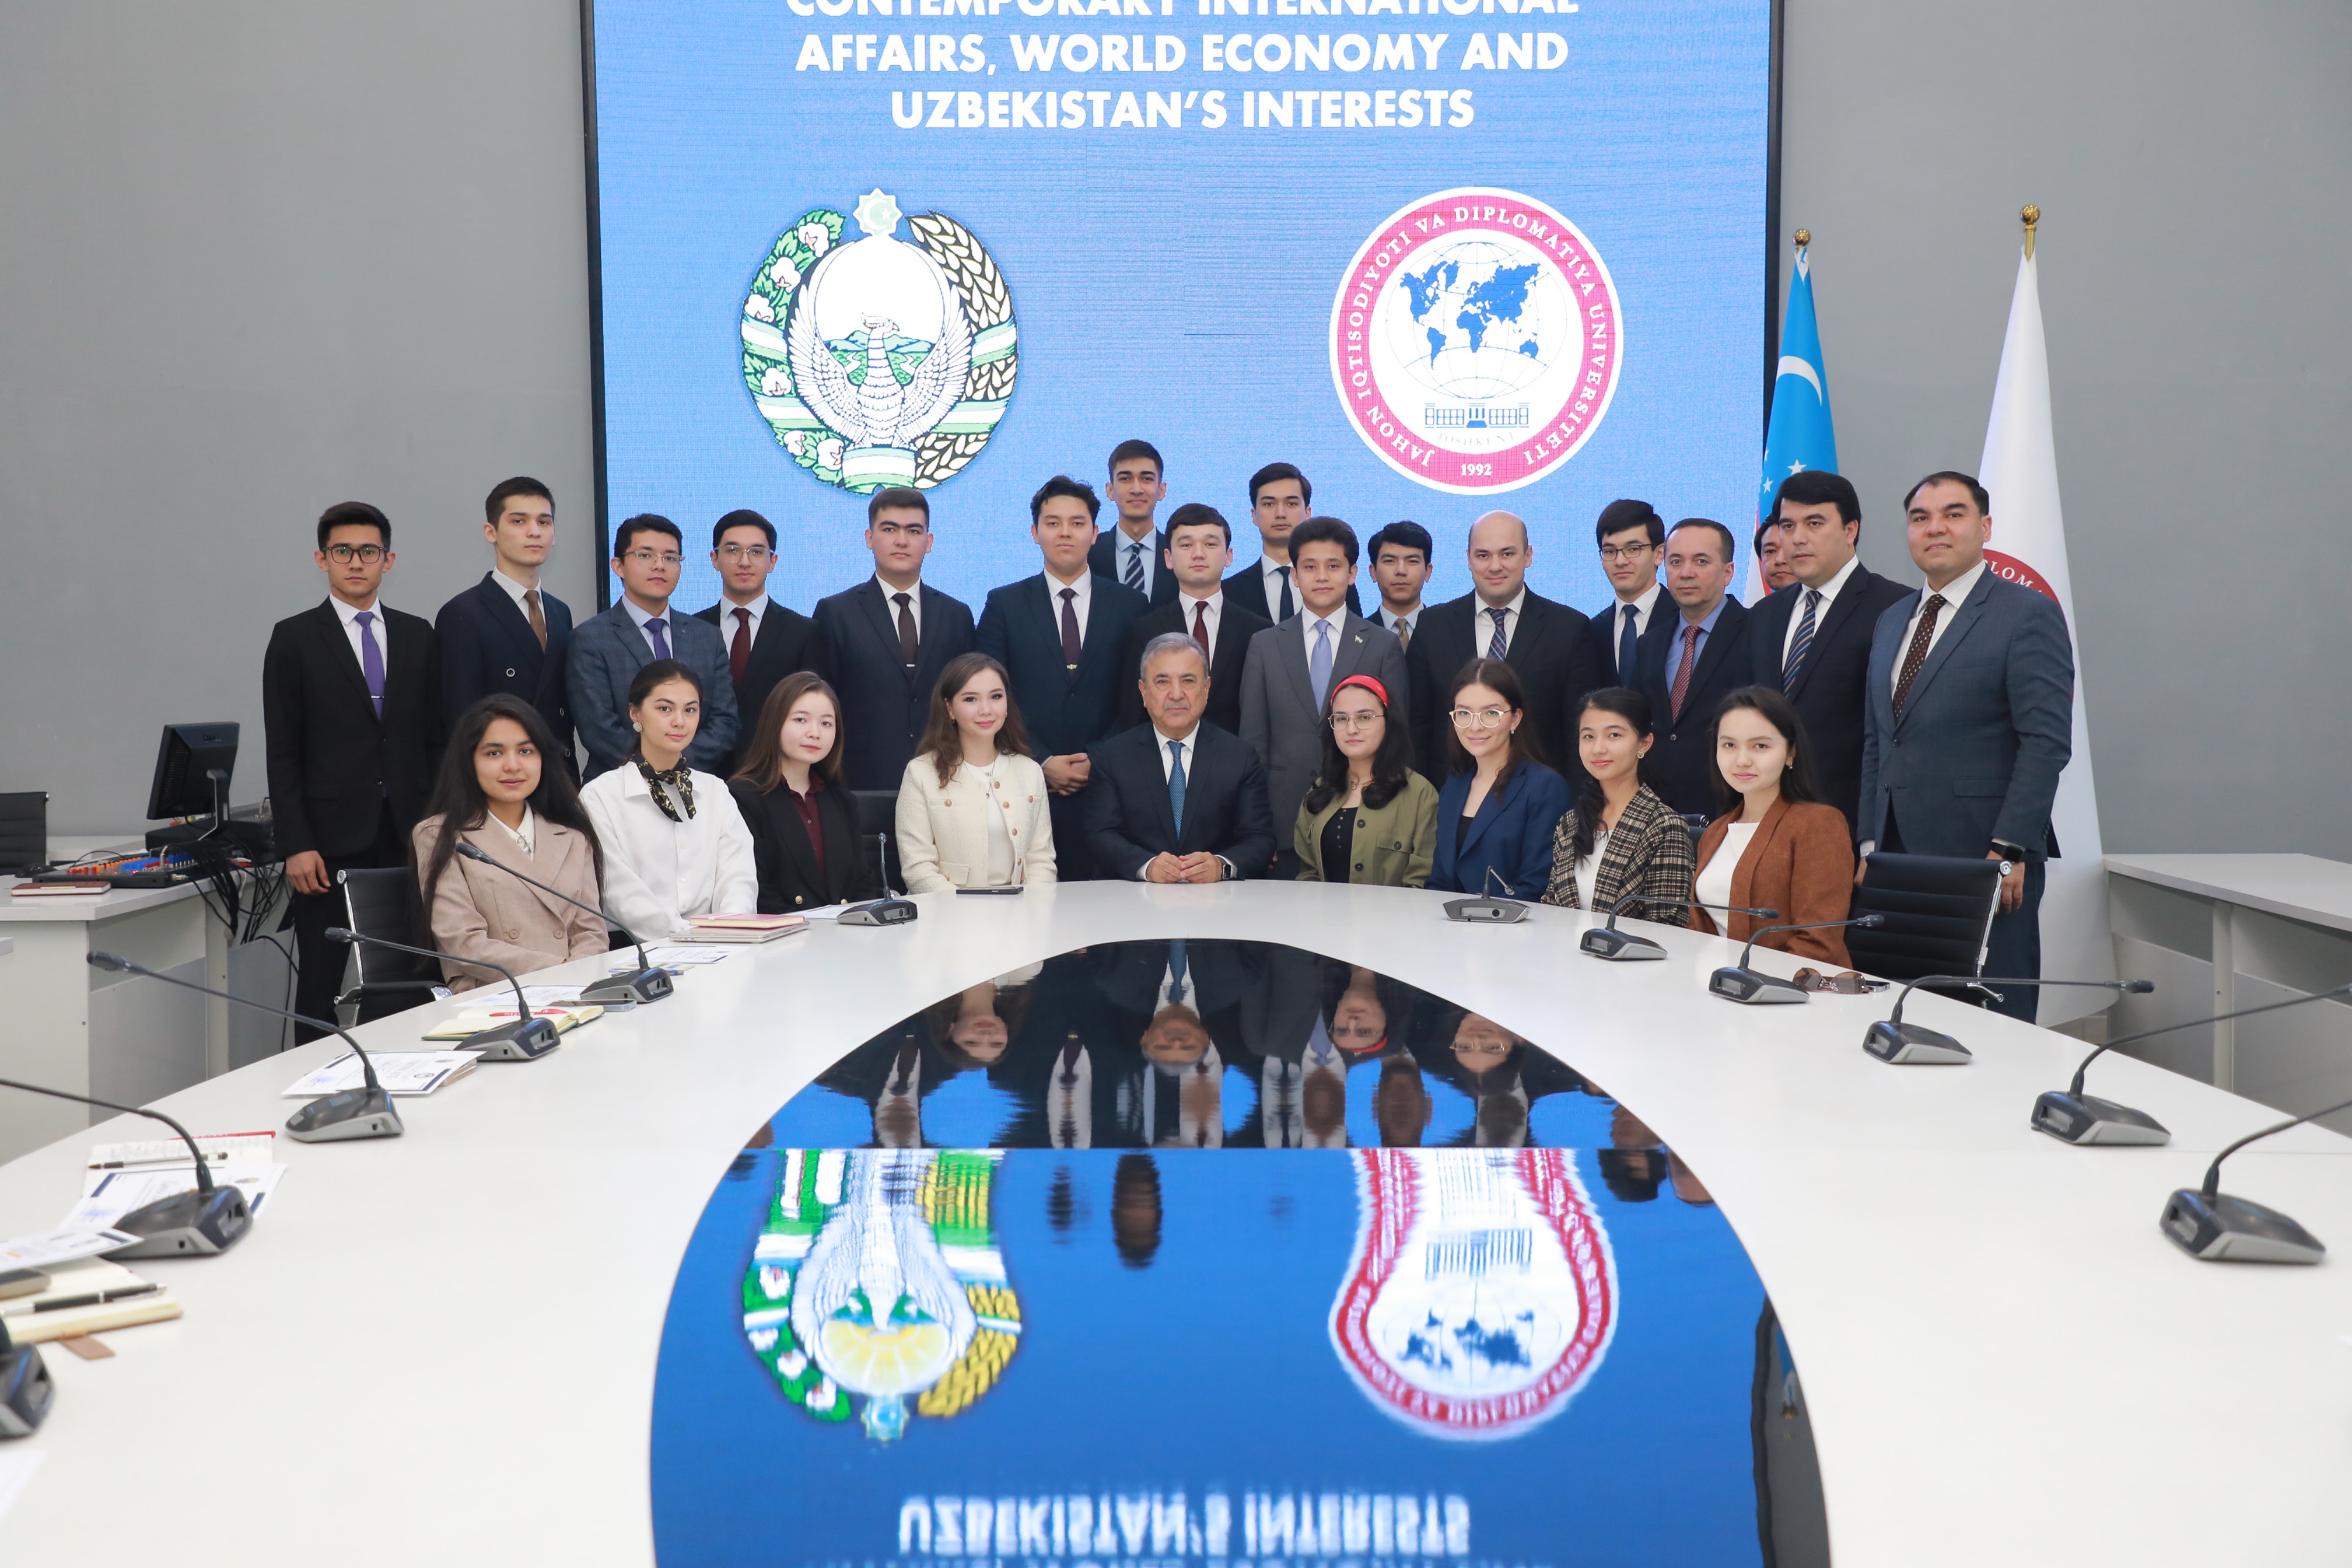 The rector’s course “Contemporary International Affairs, World Economy and Uzbekistan’s interests” has been completed